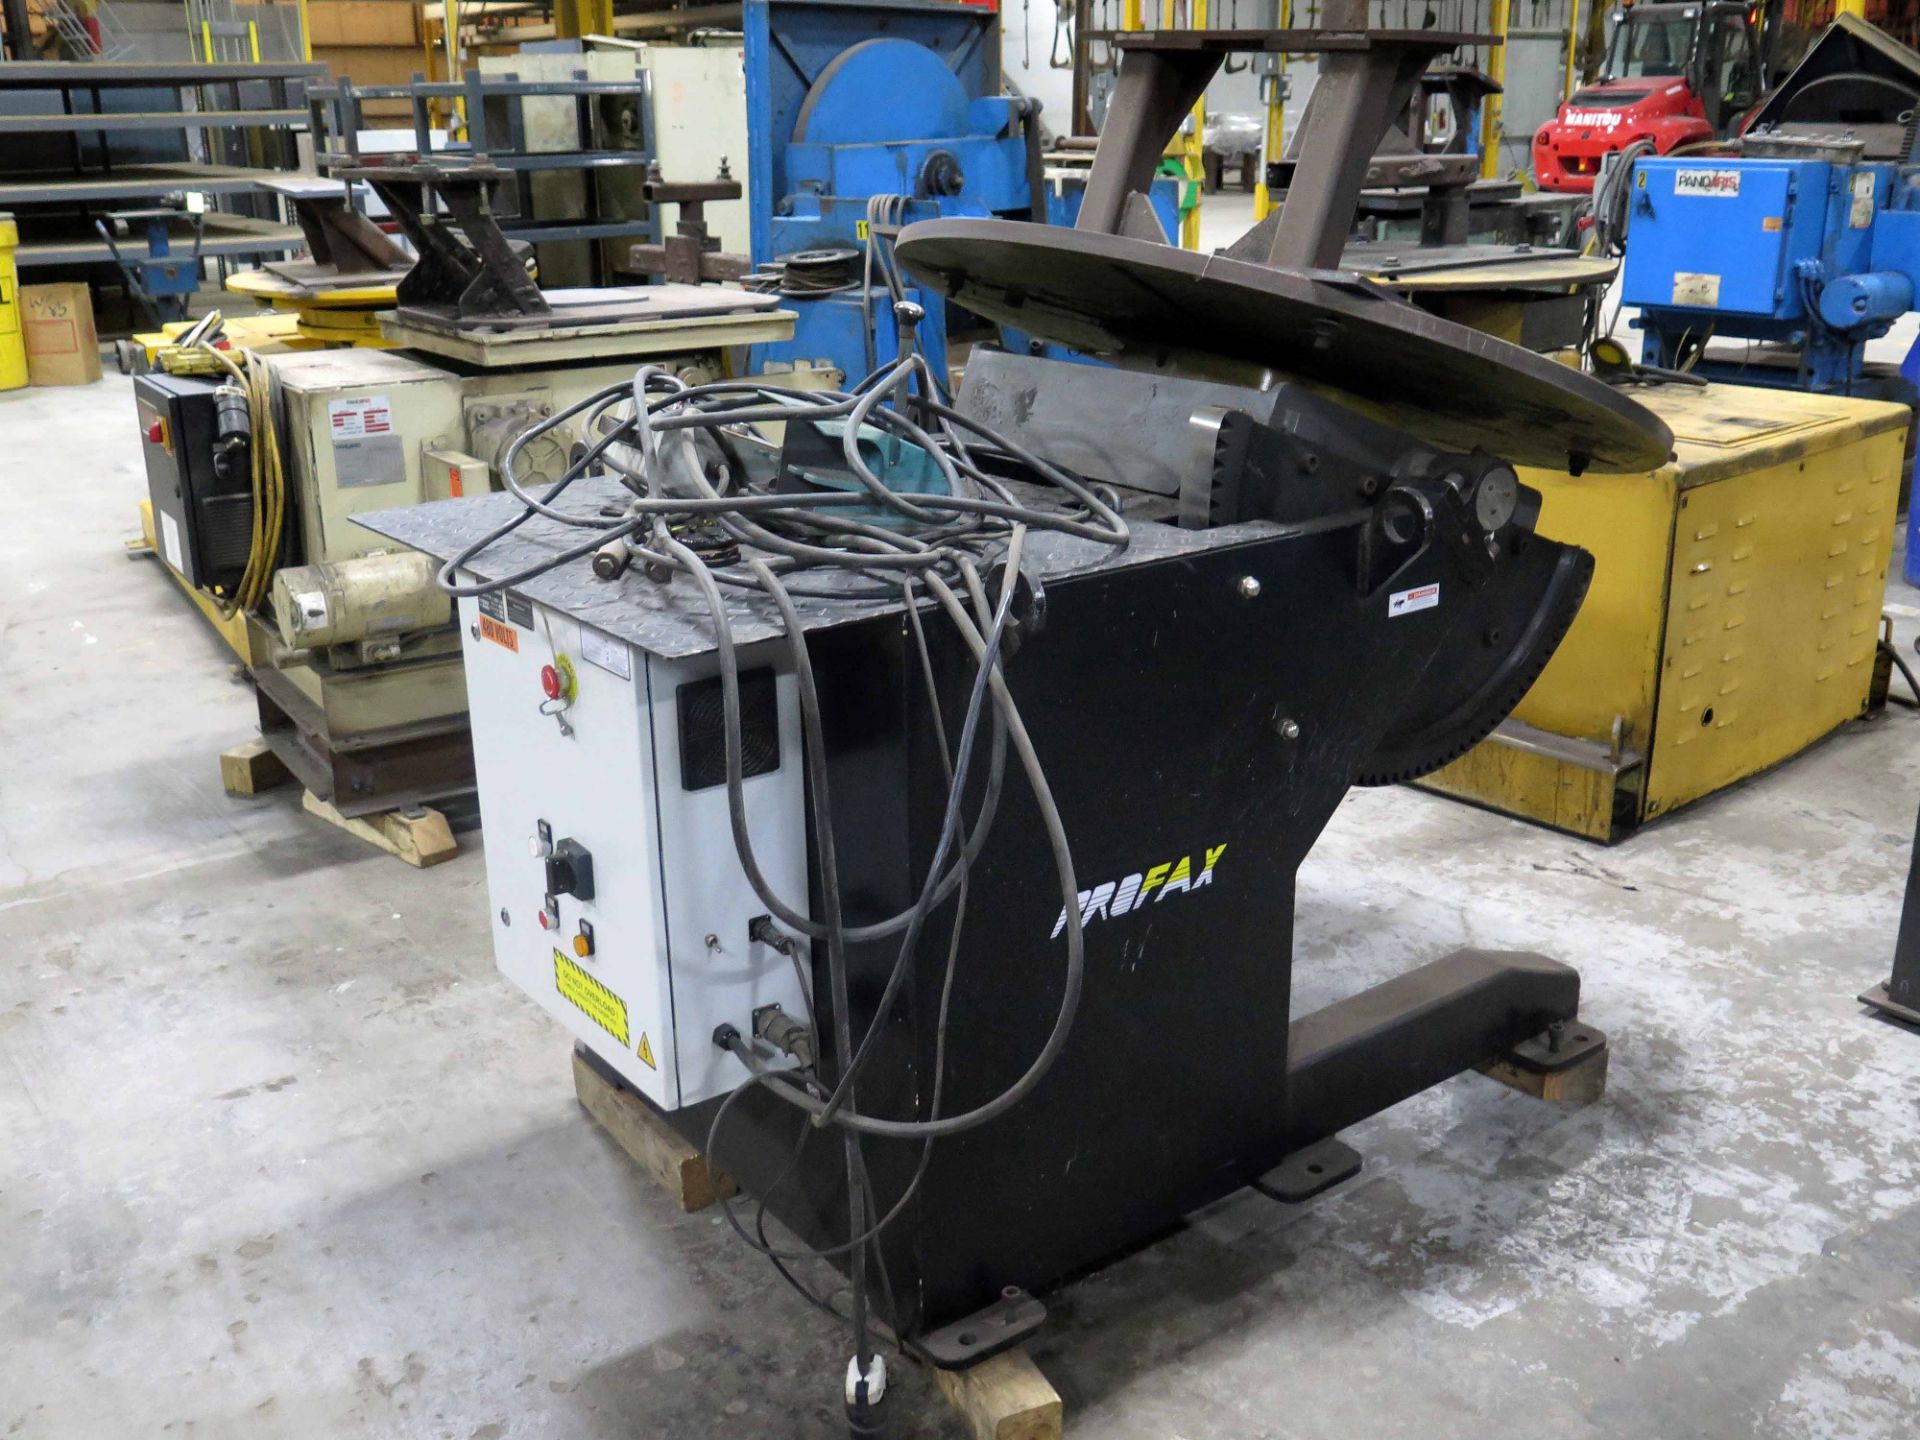 WELDING POSITIONER, PROFAX 6,000 LB. CAP. MDL. WP-6000-4, 47.24" dia. Table, spds: .12 to 1.2 RPM, 0 - Image 3 of 3